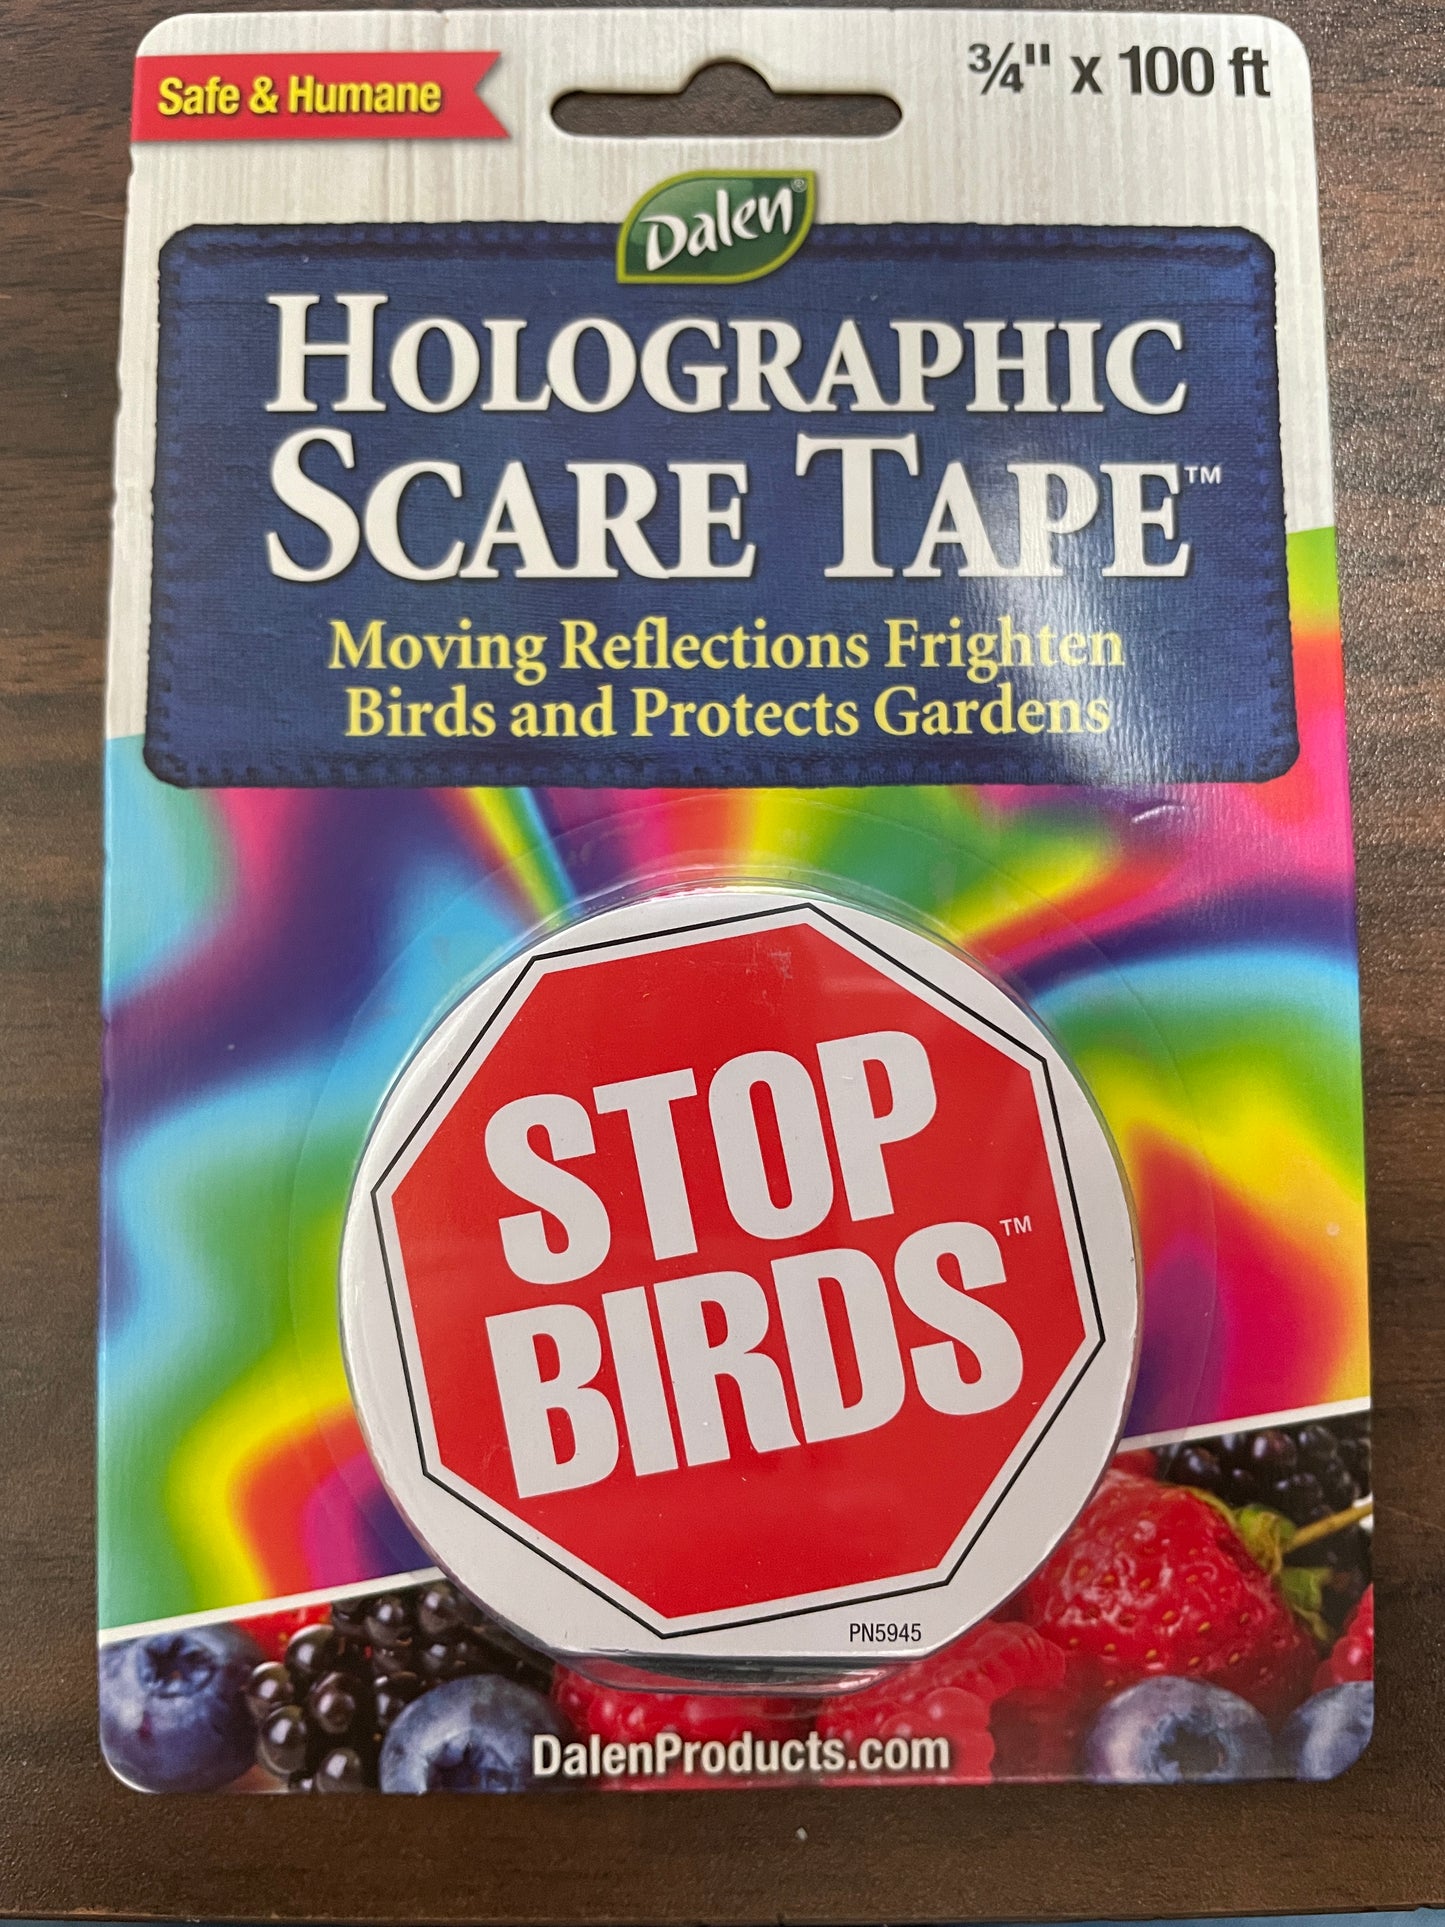 Package of holographic scare tape